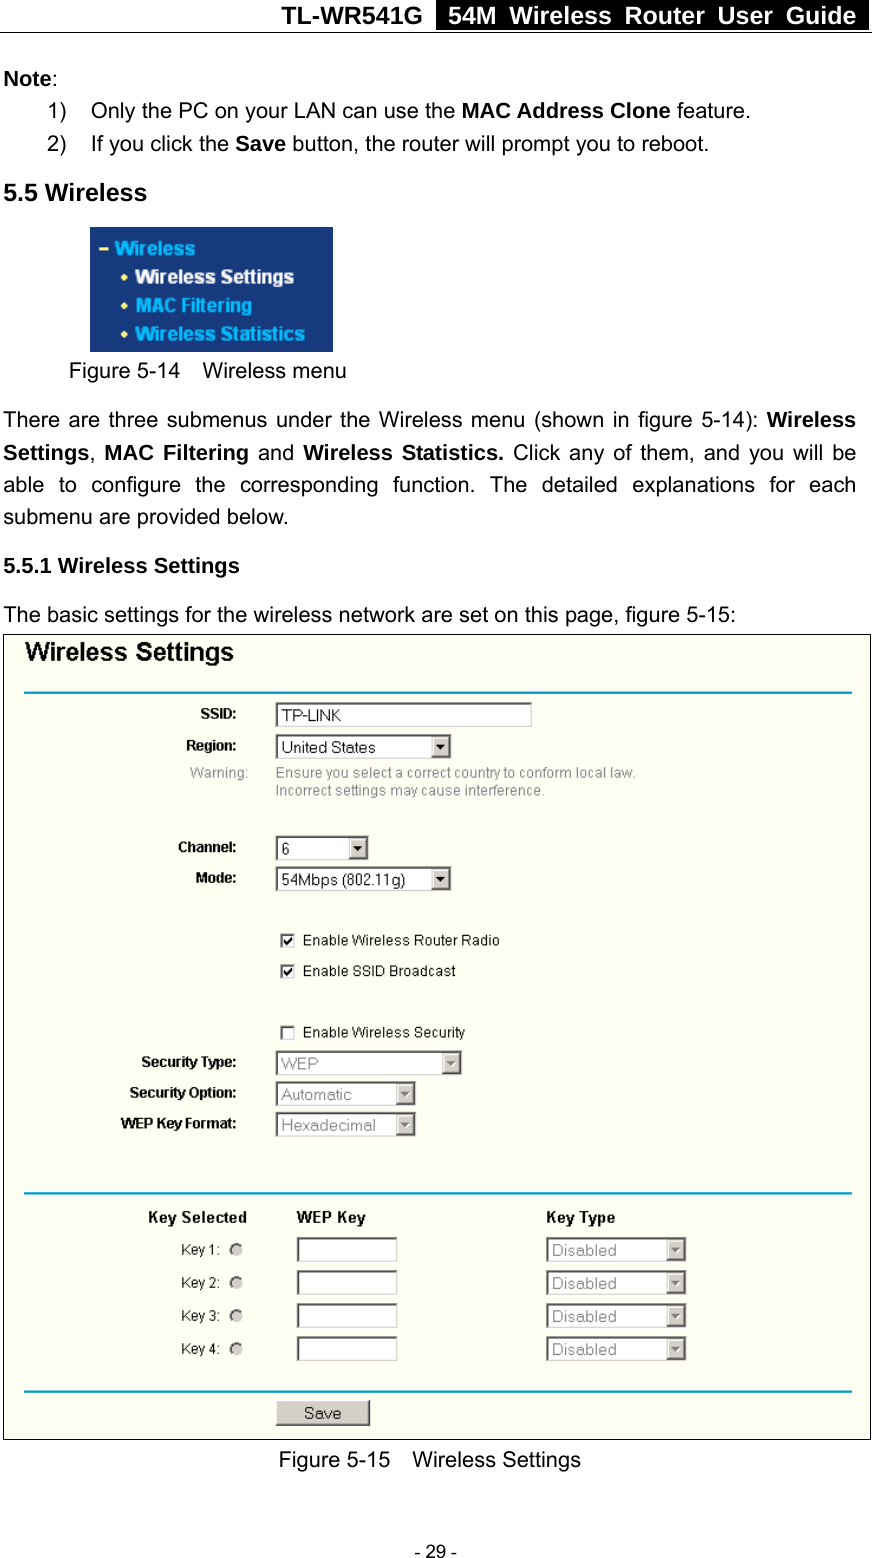 TL-WR541G   54M Wireless Router User Guide  Note:  1)  Only the PC on your LAN can use the MAC Address Clone feature. 2)  If you click the Save button, the router will prompt you to reboot. 5.5 Wireless  Figure 5-14  Wireless menu There are three submenus under the Wireless menu (shown in figure 5-14): Wireless Settings, MAC Filtering and Wireless Statistics. Click any of them, and you will be able to configure the corresponding function. The detailed explanations for each submenu are provided below. 5.5.1 Wireless Settings The basic settings for the wireless network are set on this page, figure 5-15:  Figure 5-15  Wireless Settings  - 29 - 